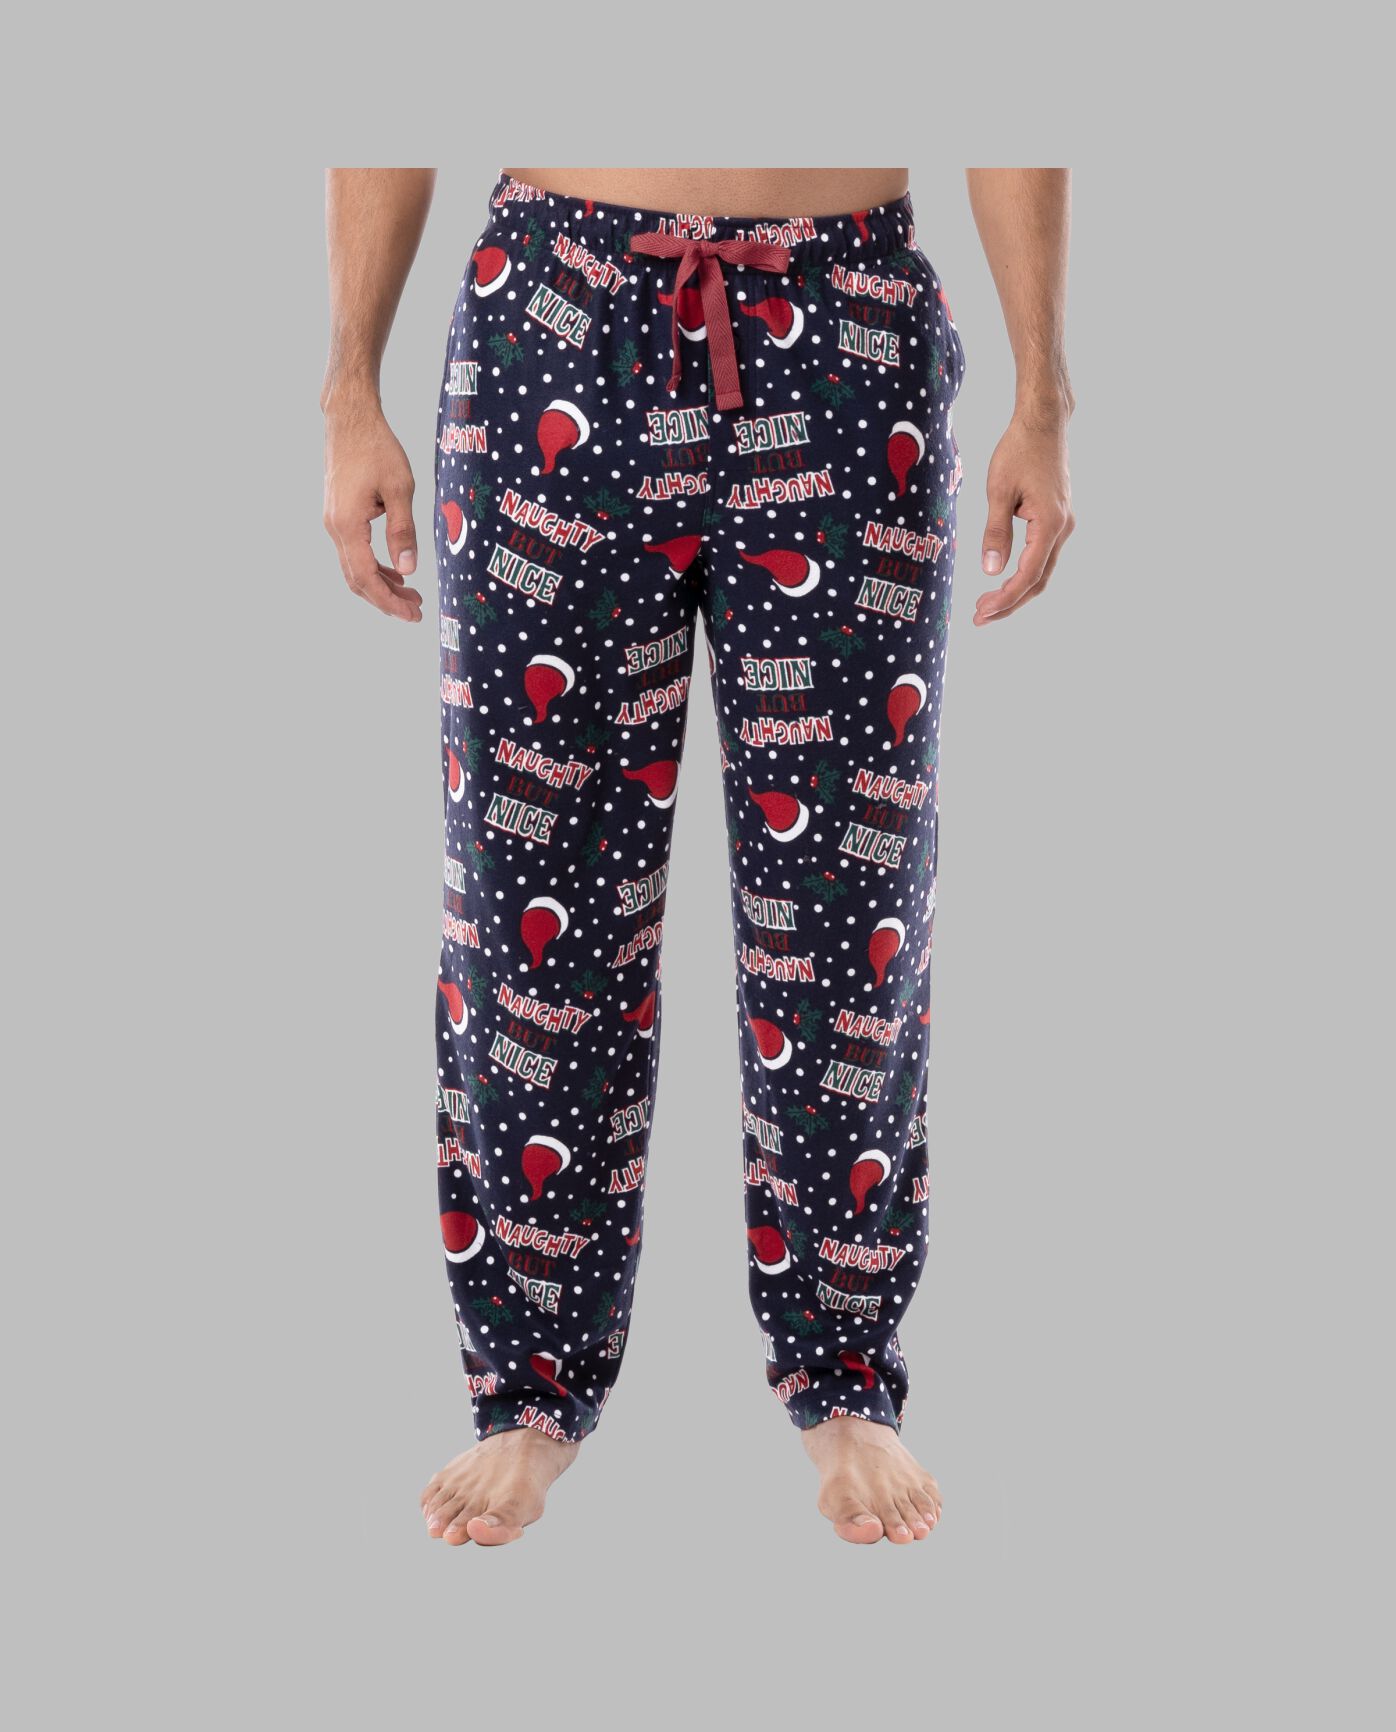 Fruit of the Loom Men's Holiday and Plaid Microfleece Sleep Pant, 2 Pack NAUGHTY BUT NICE/NAVY PLAID